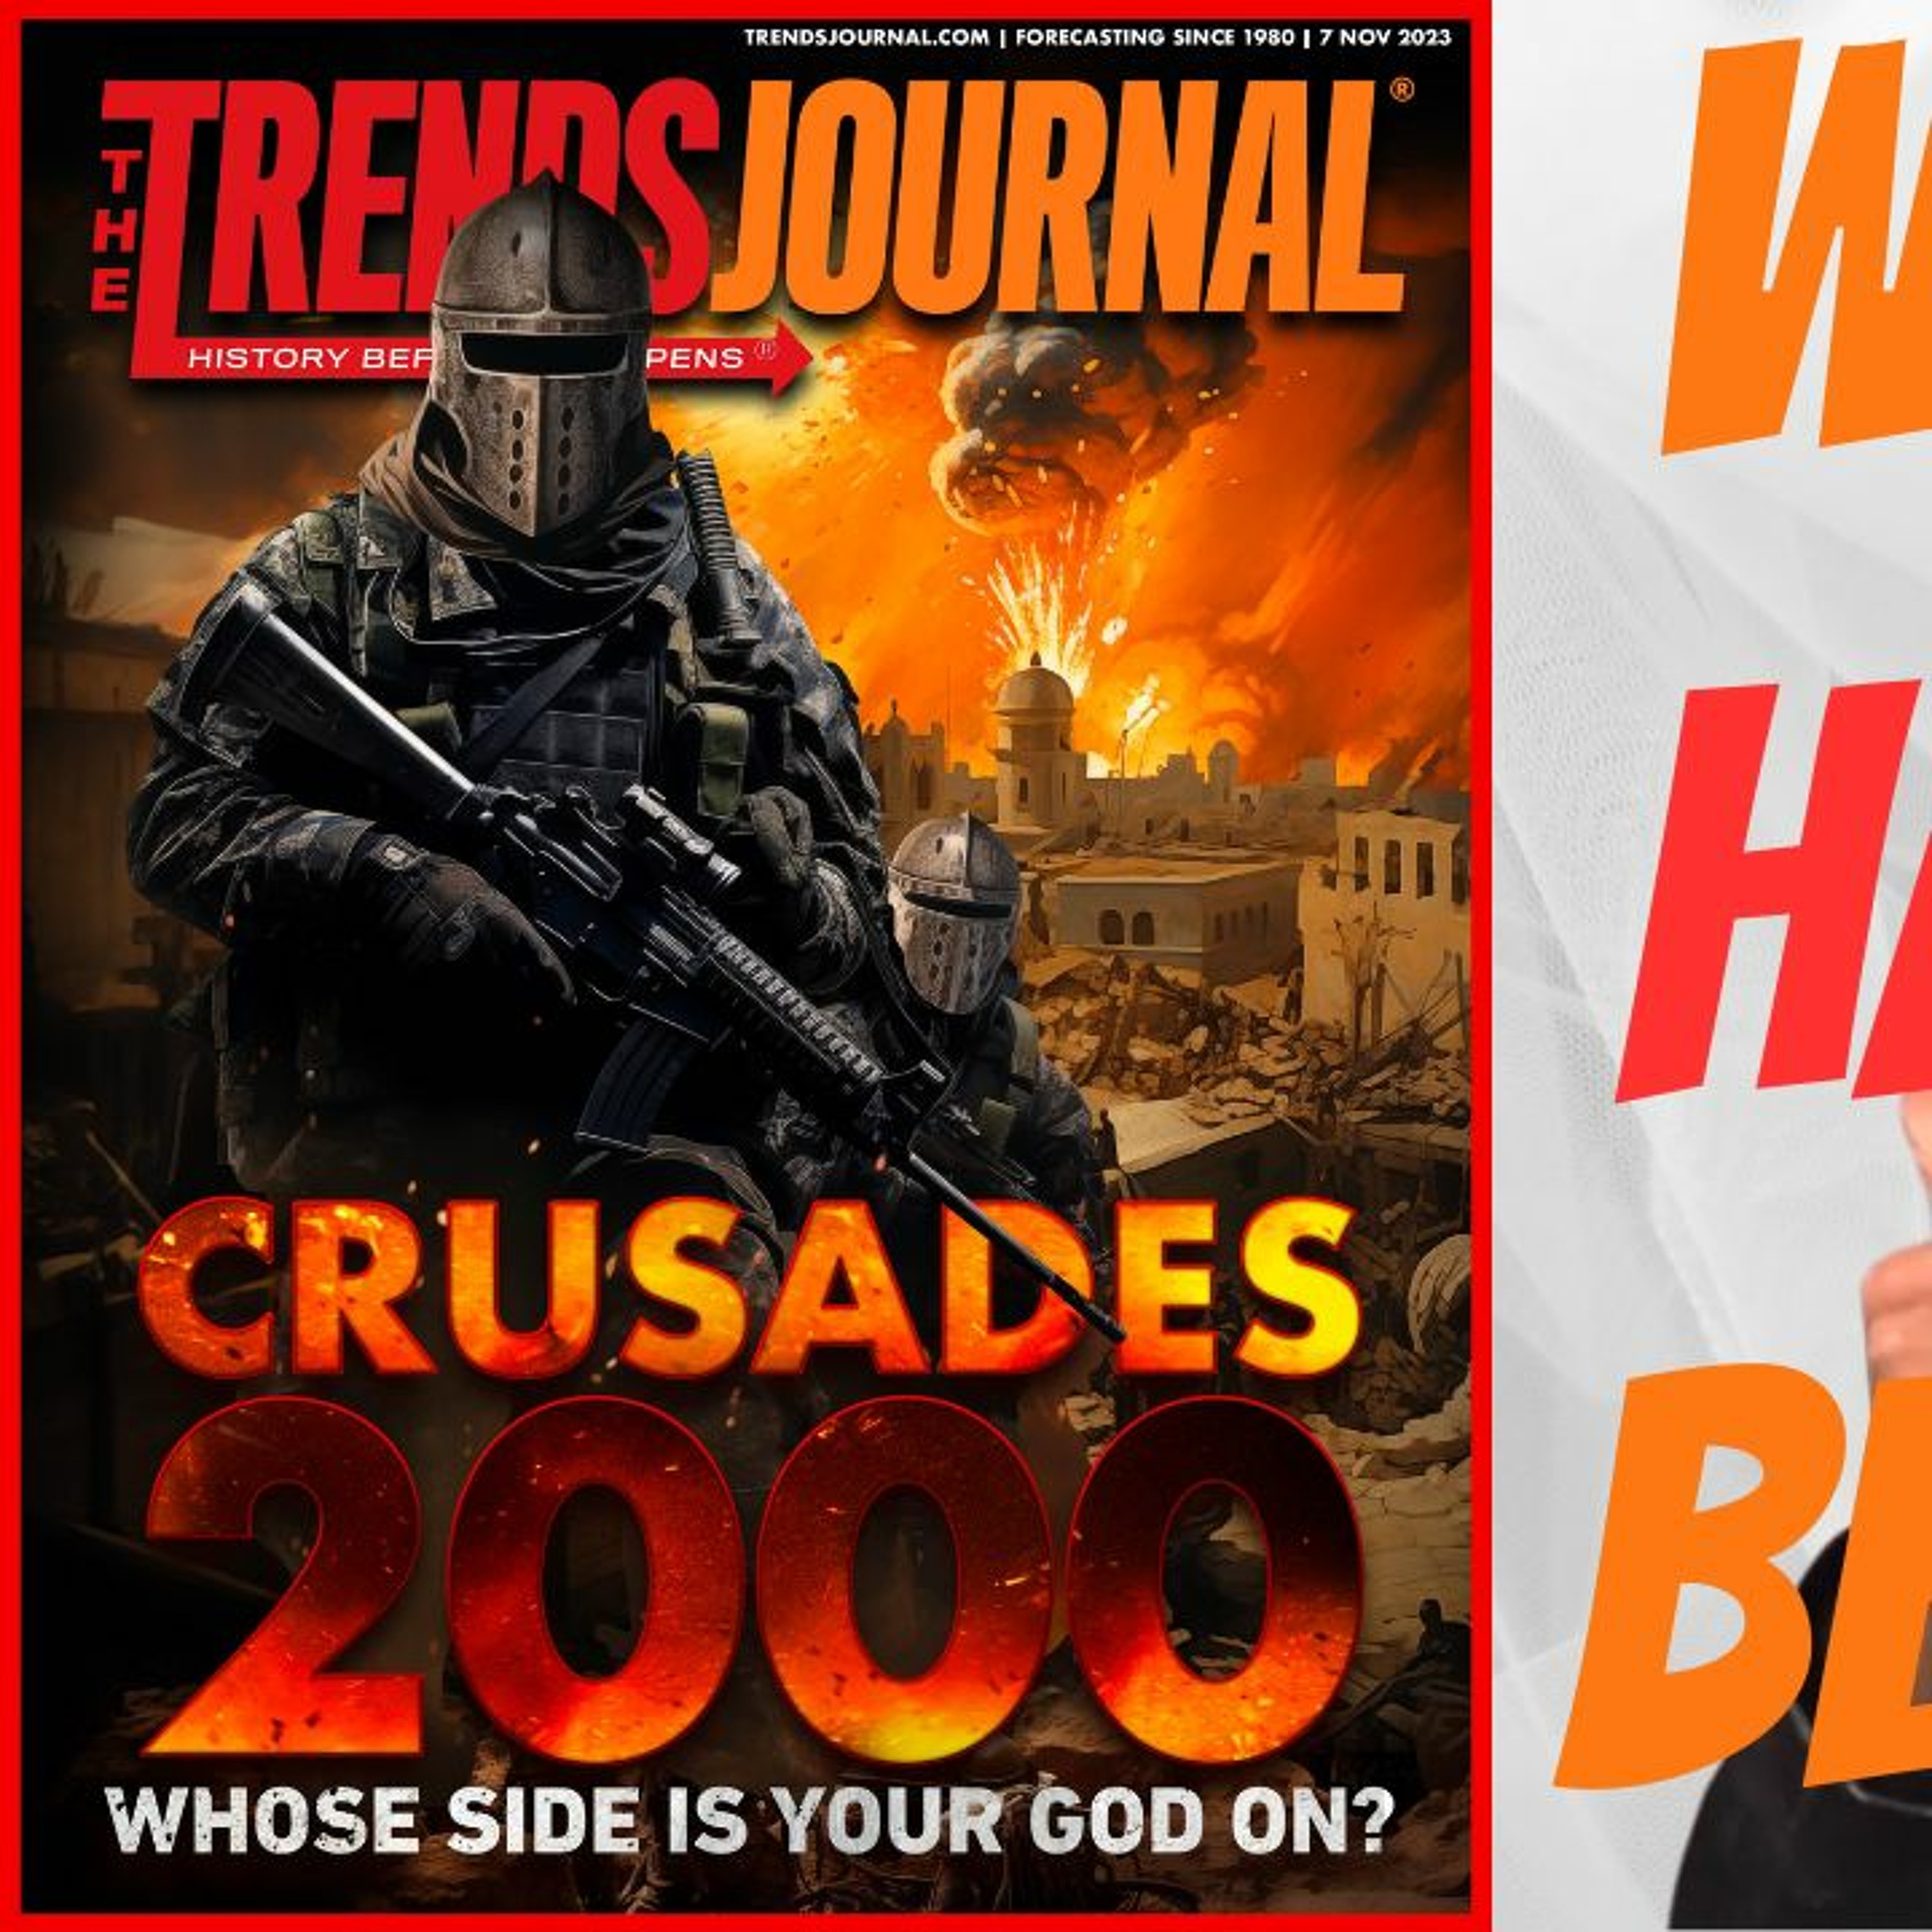 CRUSADES 2000: WHOSE SIDE IS YOUR GOD ON?